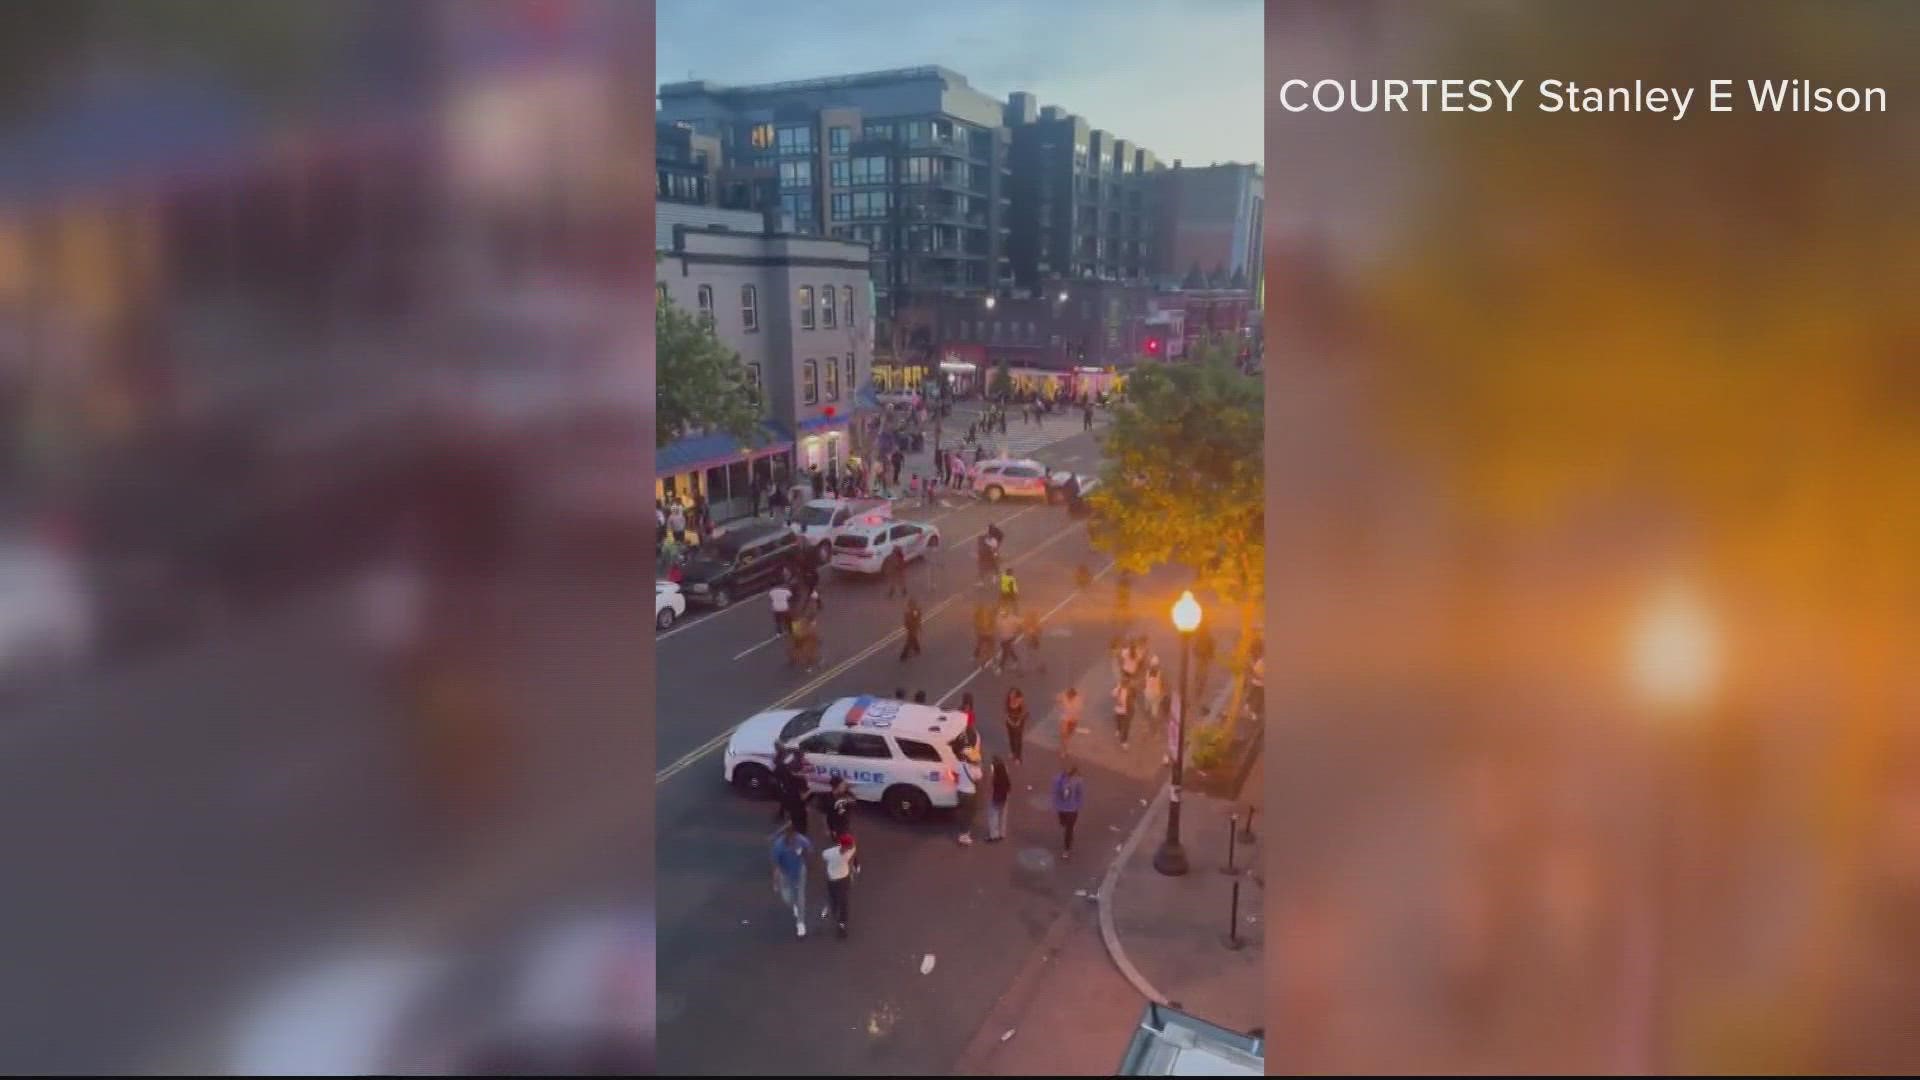 Police arrested a 15-year-old boy on murder charges in connection to a deadly shooting that happened during an unpermitted free music event in D.C. on Juneteenth